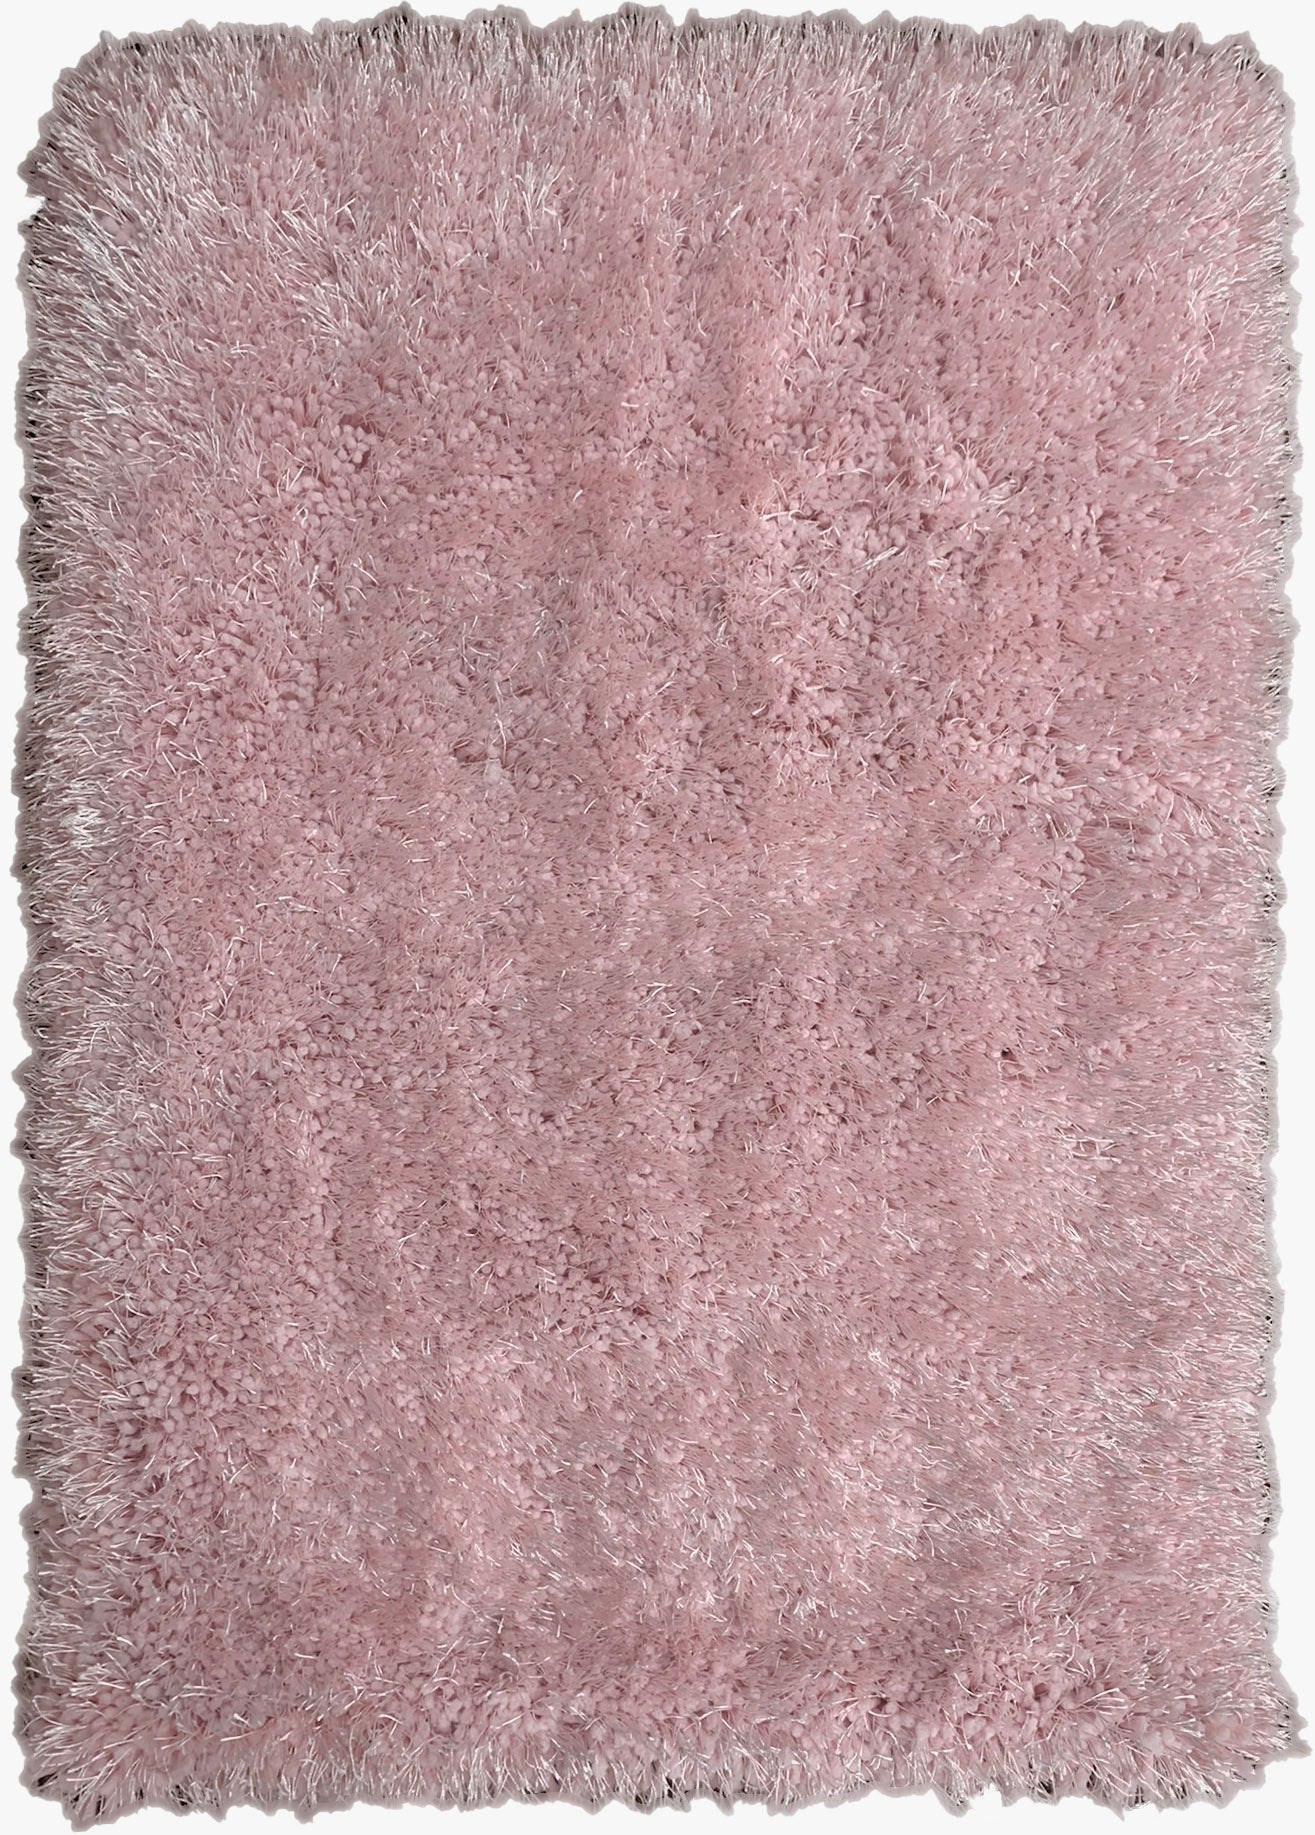 Shaggy Viscose Solid Dusty Pink